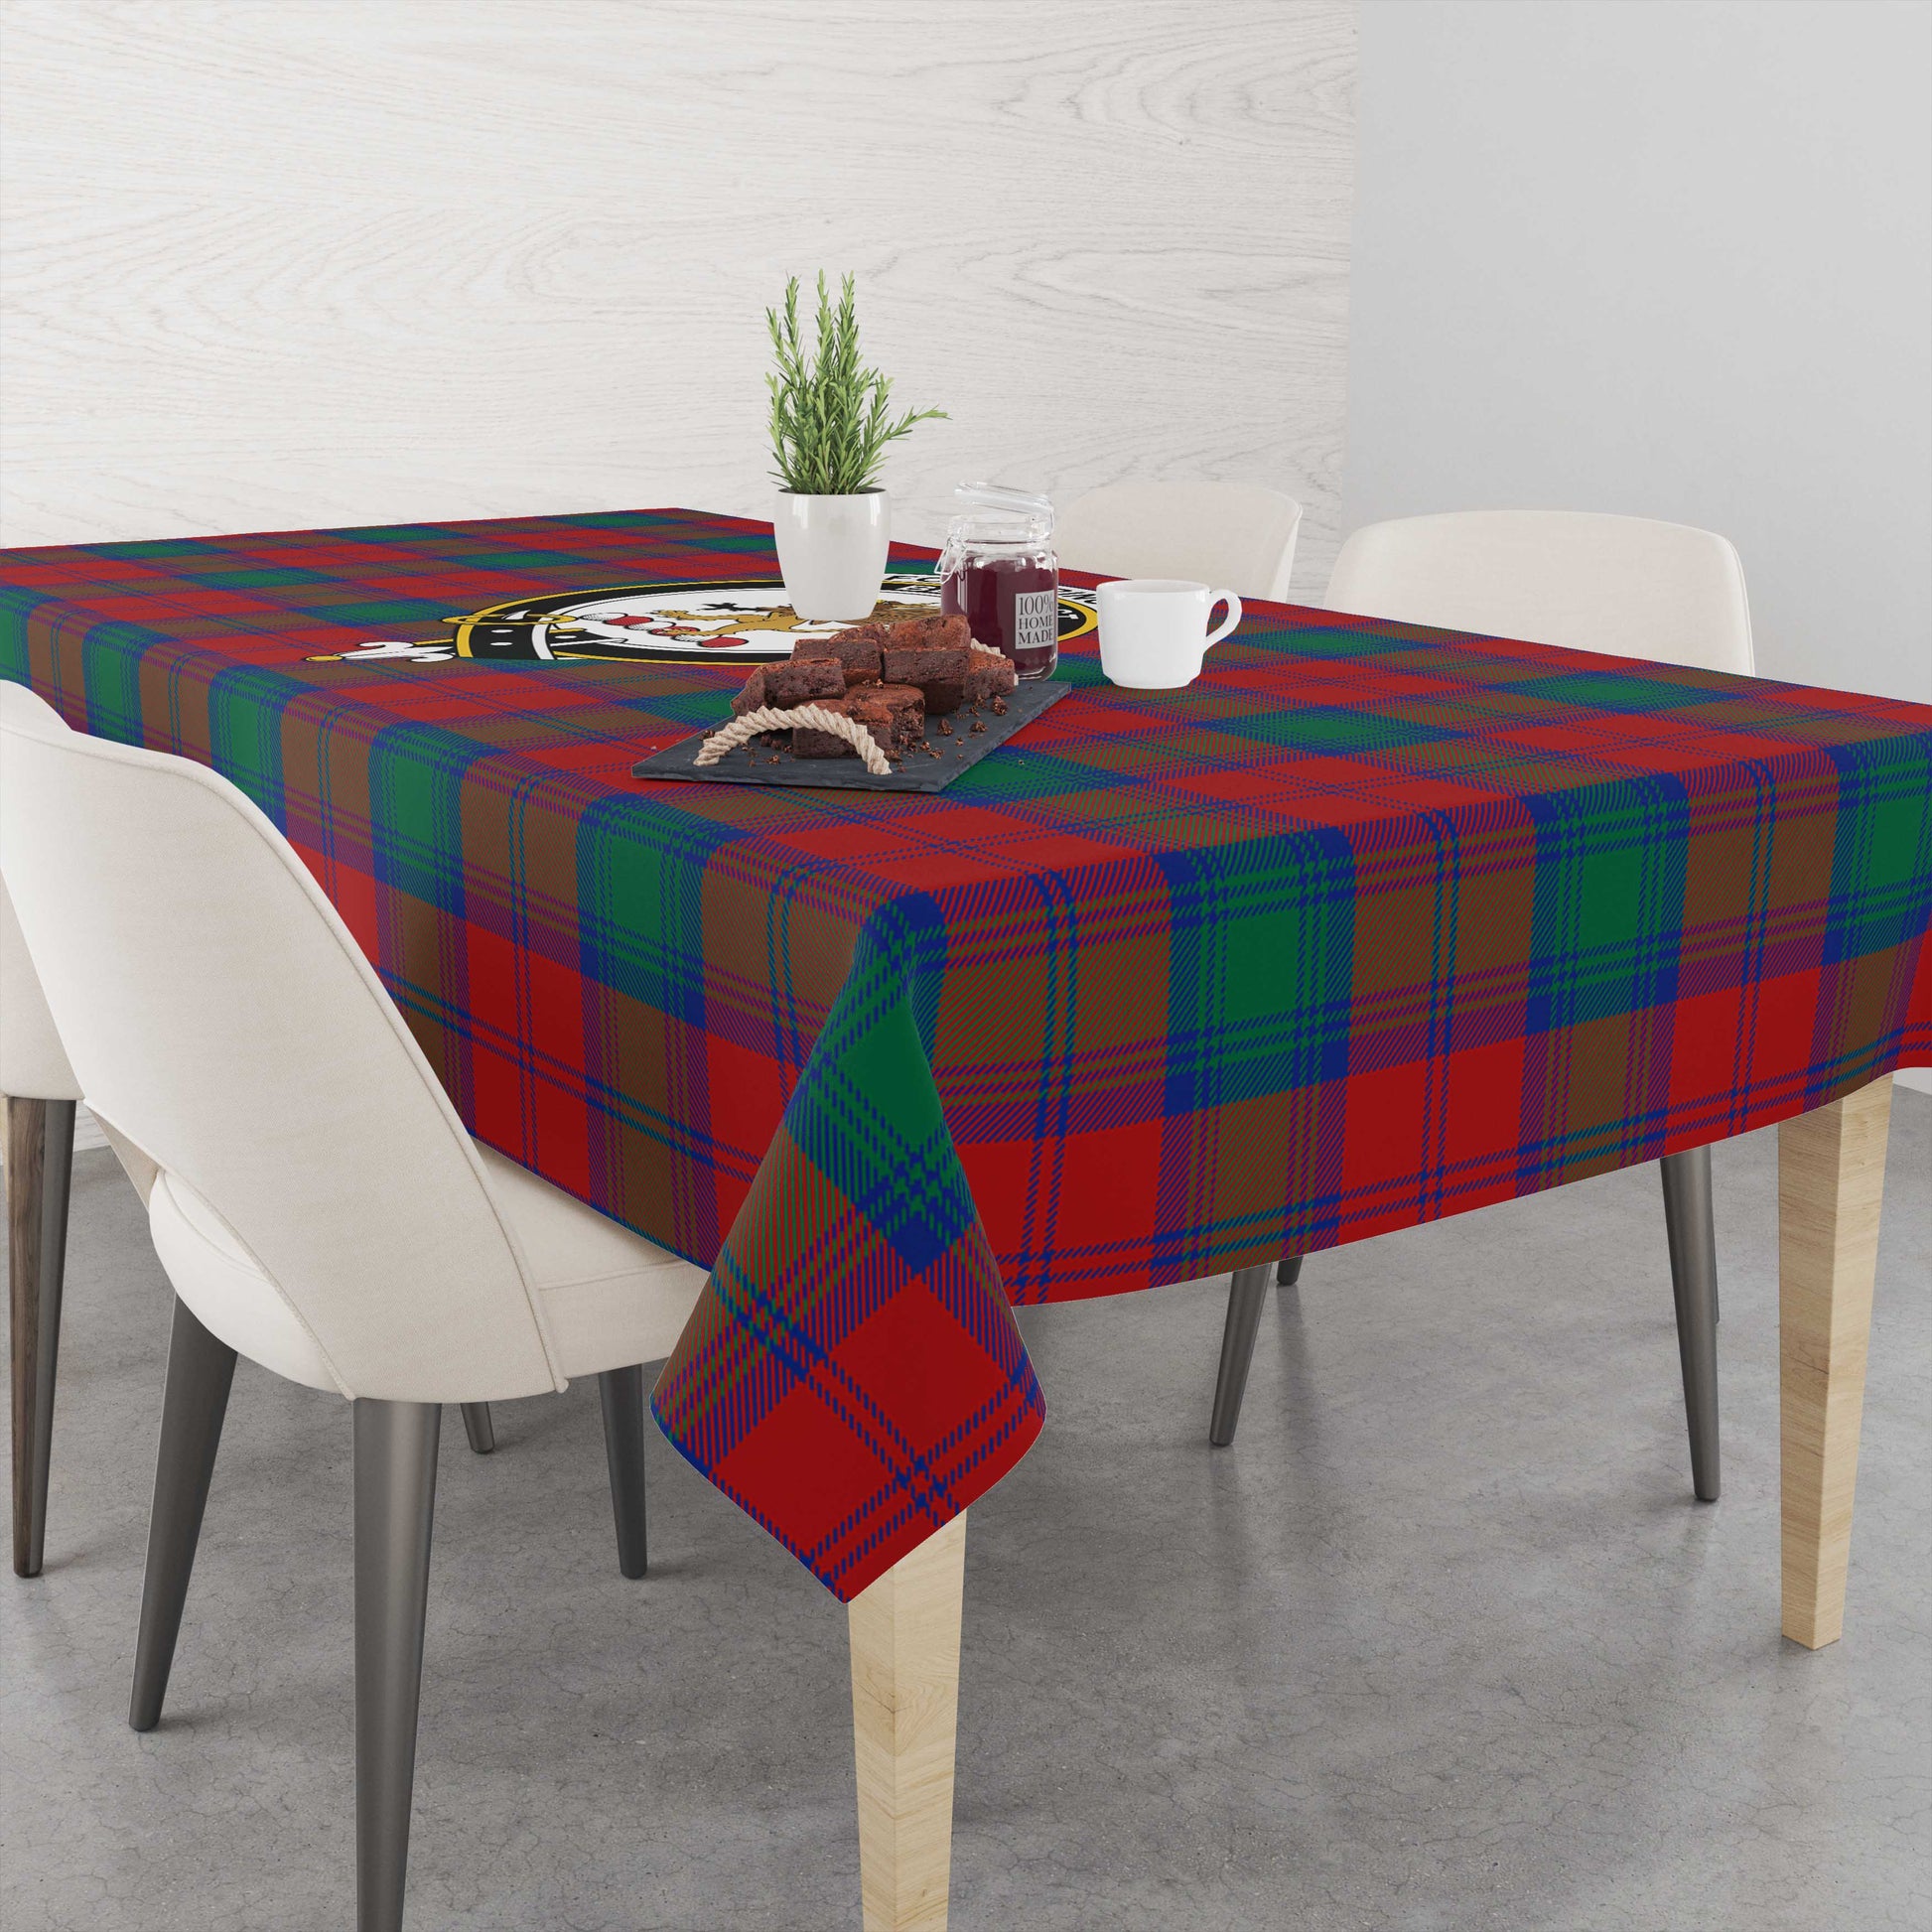 fotheringham-modern-tatan-tablecloth-with-family-crest